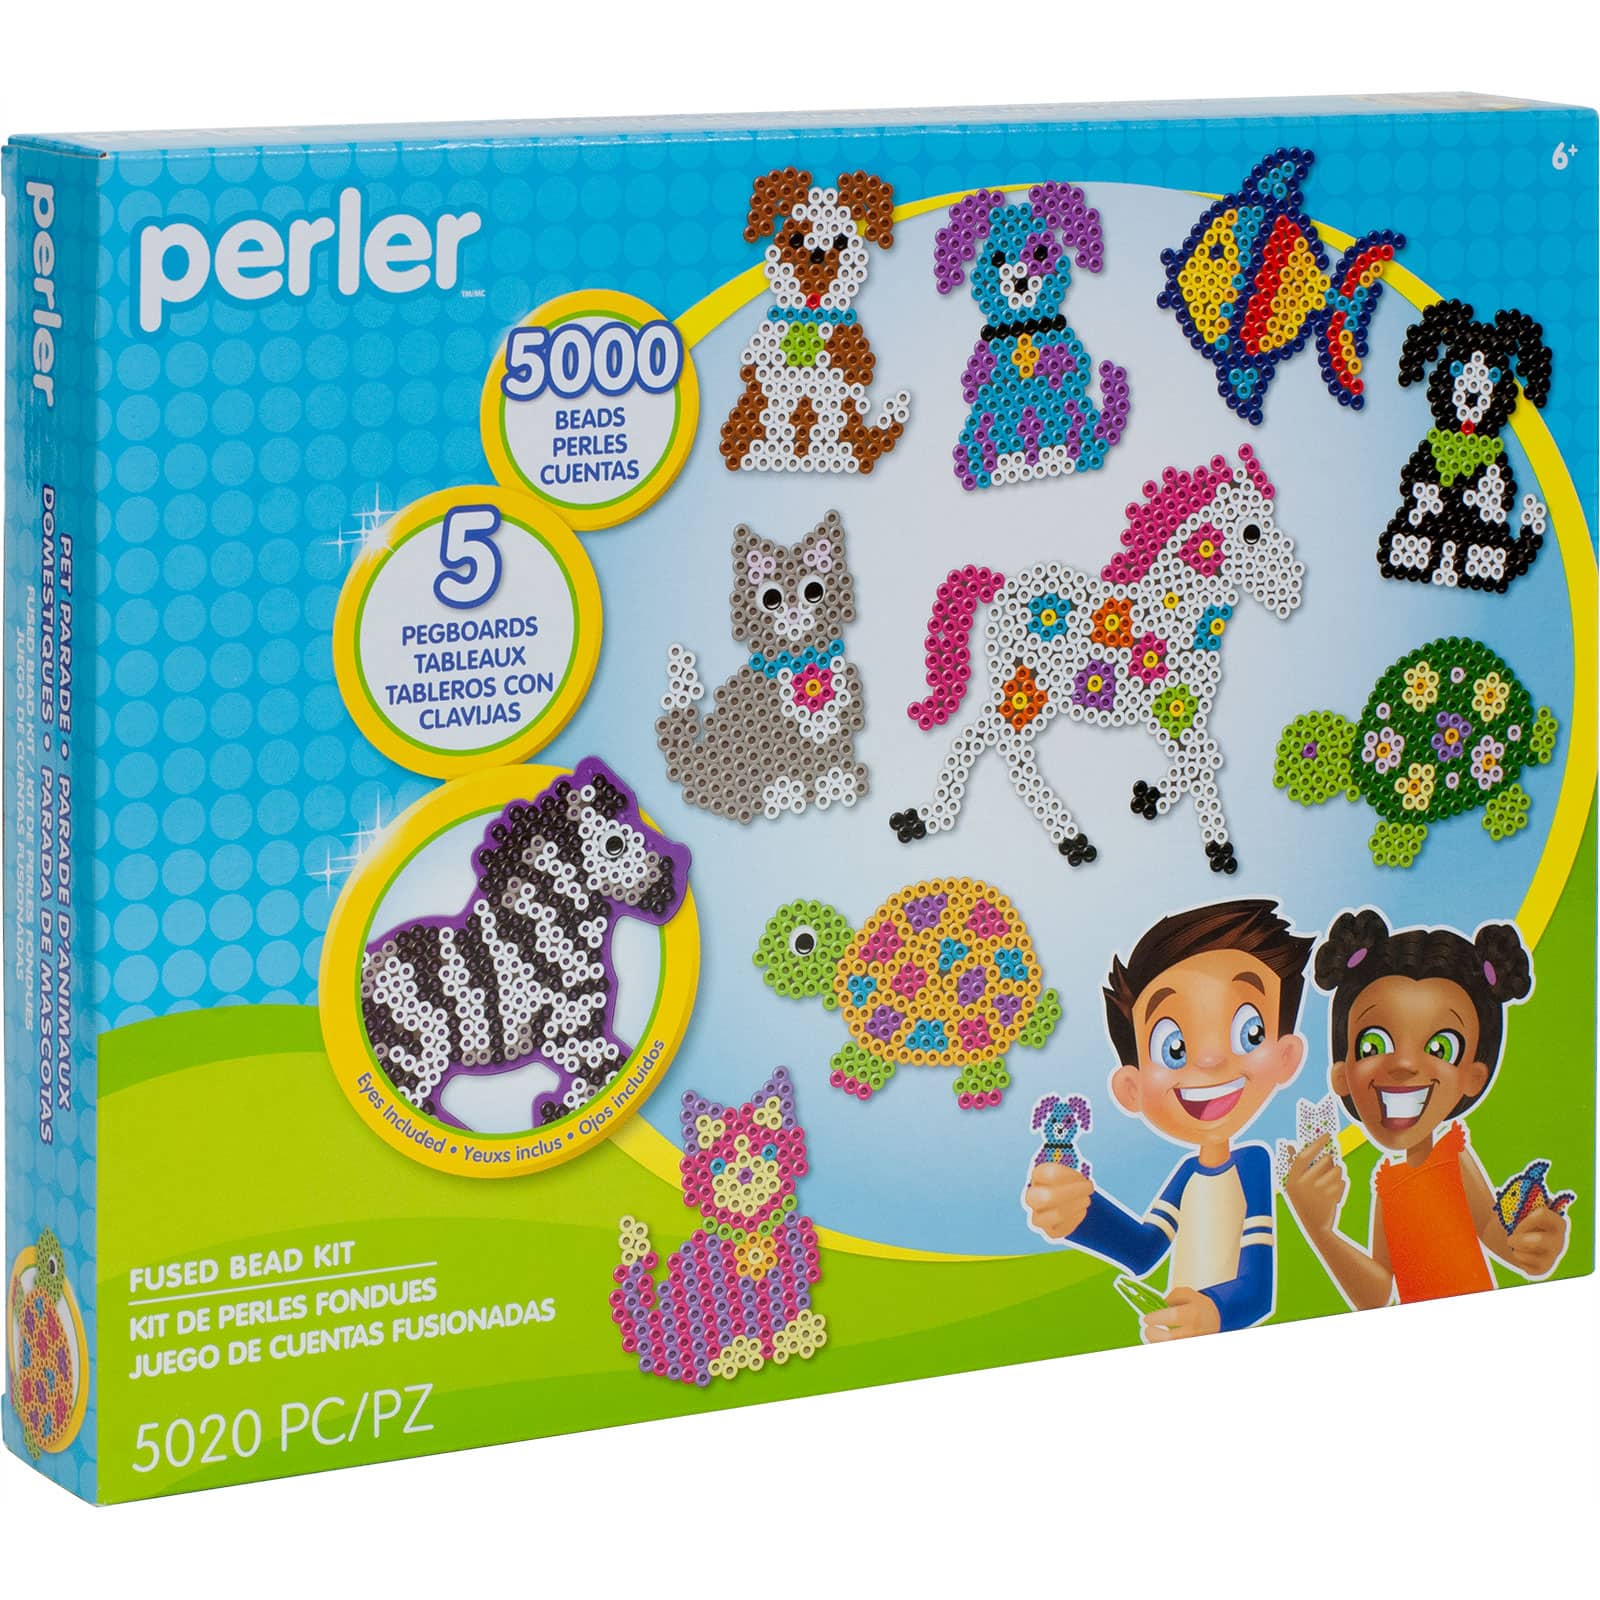 Find the Perler™ Fused Bead Kit at Michaels